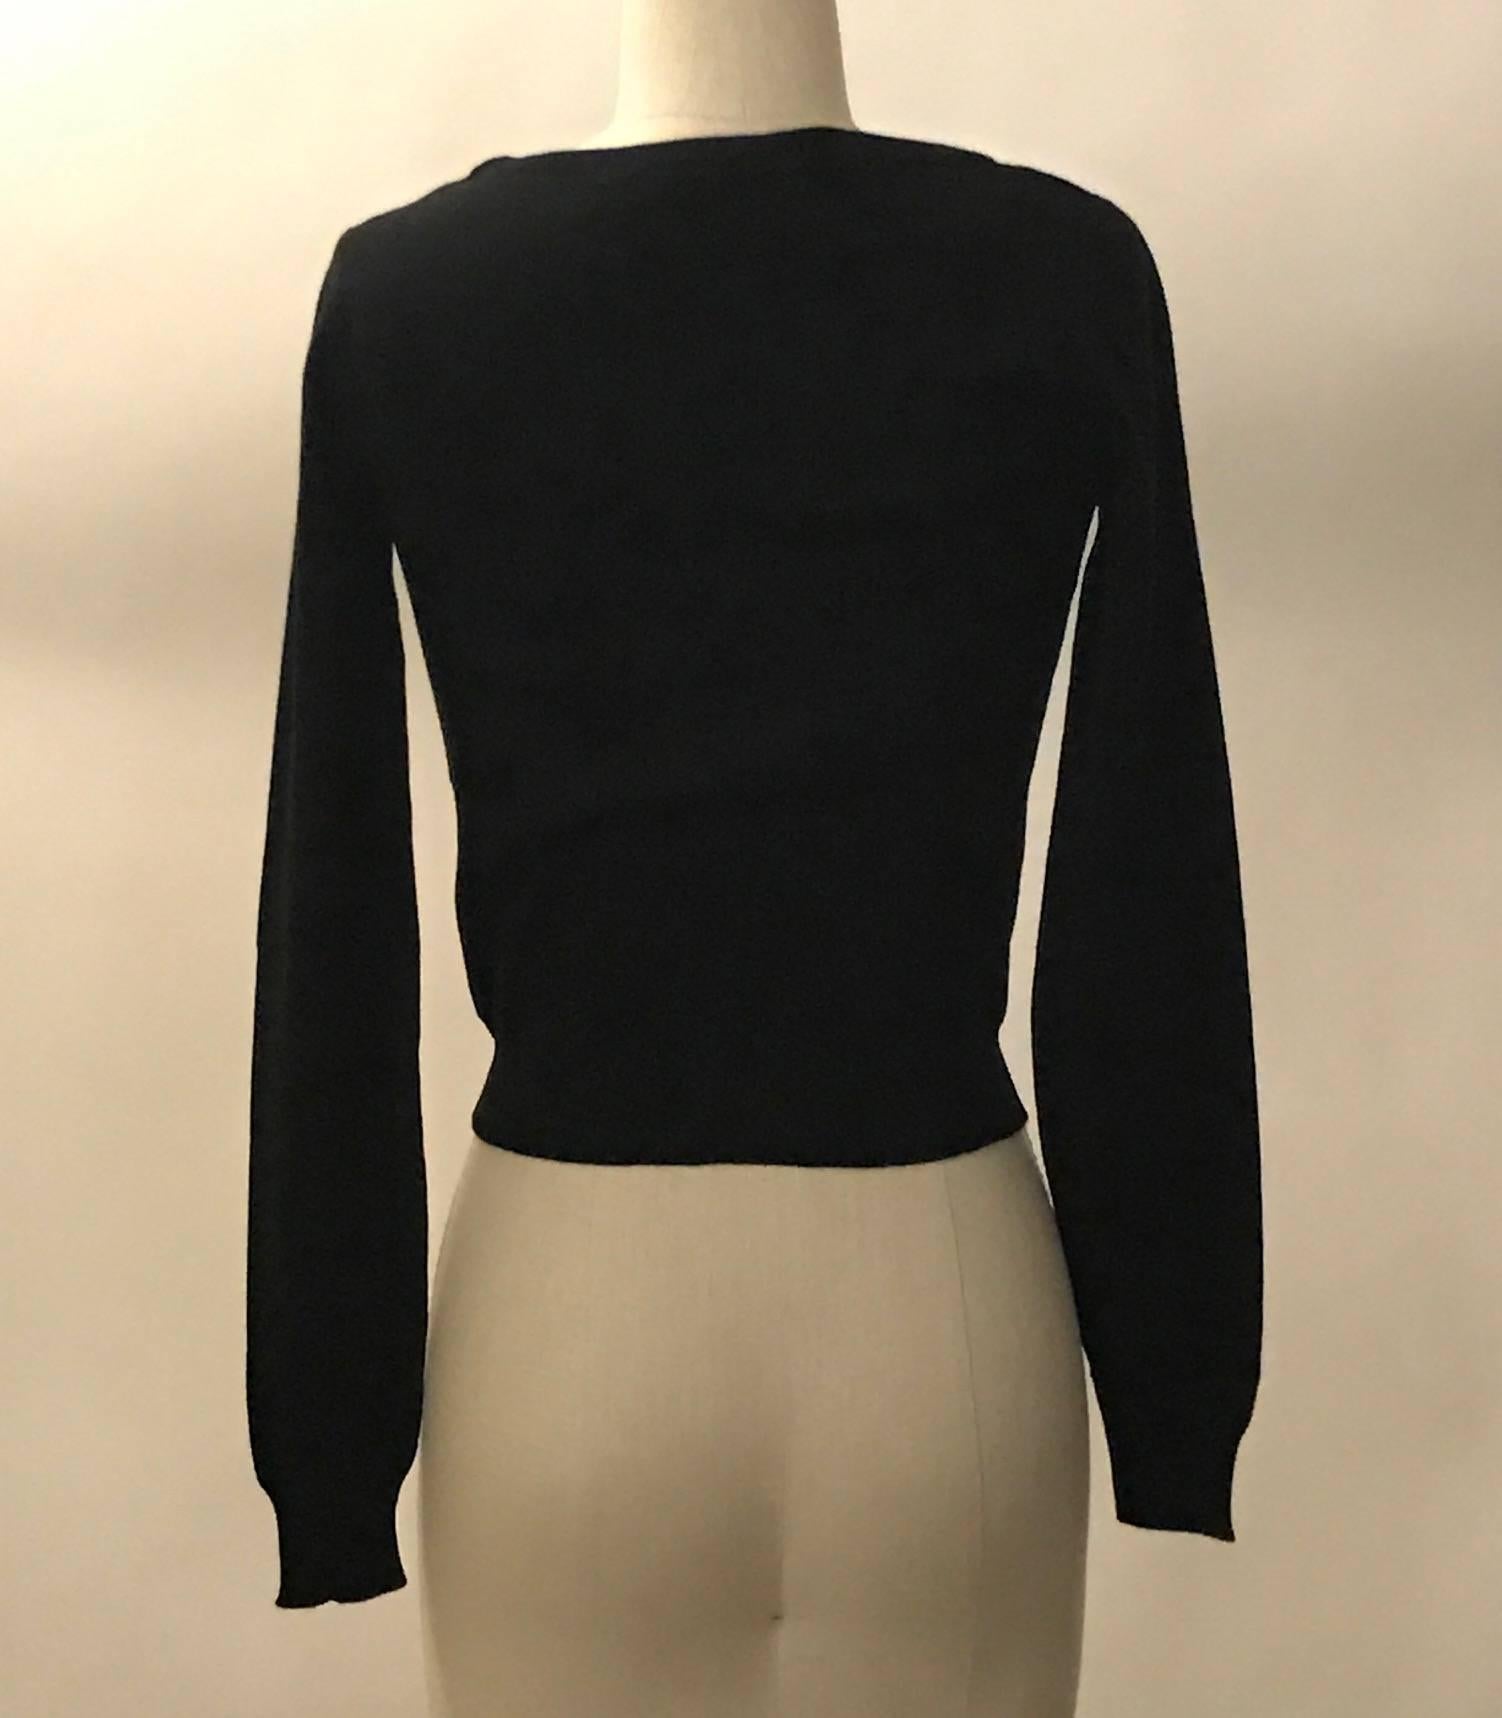 Recent Moschino Couture by Jeremy Scott black and white sweater with 'Dry Clean Only' in intarsia knit print at front. Crew neck, long sleeves, shorter, fitted style.

100% virgin wool. 

Made in Italy.

Size IT 38, best fits XS. Stretchy,